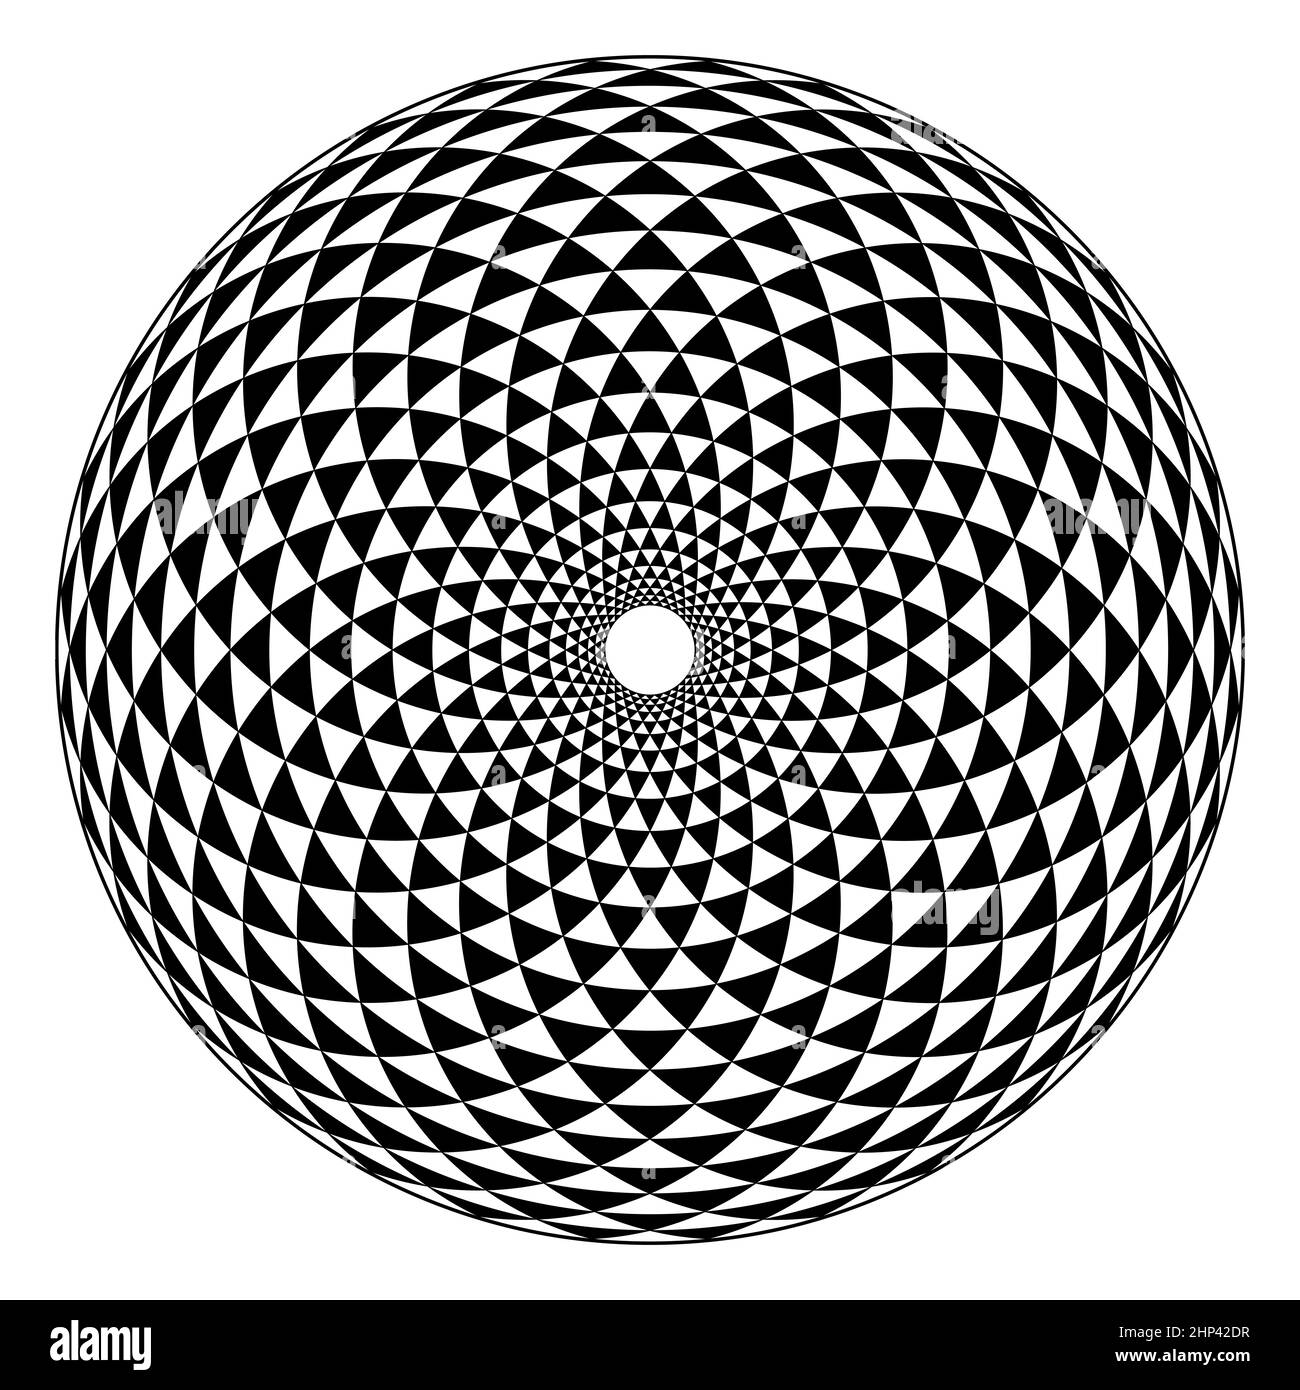 Fibonacci pattern, black and white triangle checkered circle, formed by arcs, arranged in spiral form, crossed by circles, creating bend triangles. Stock Photo